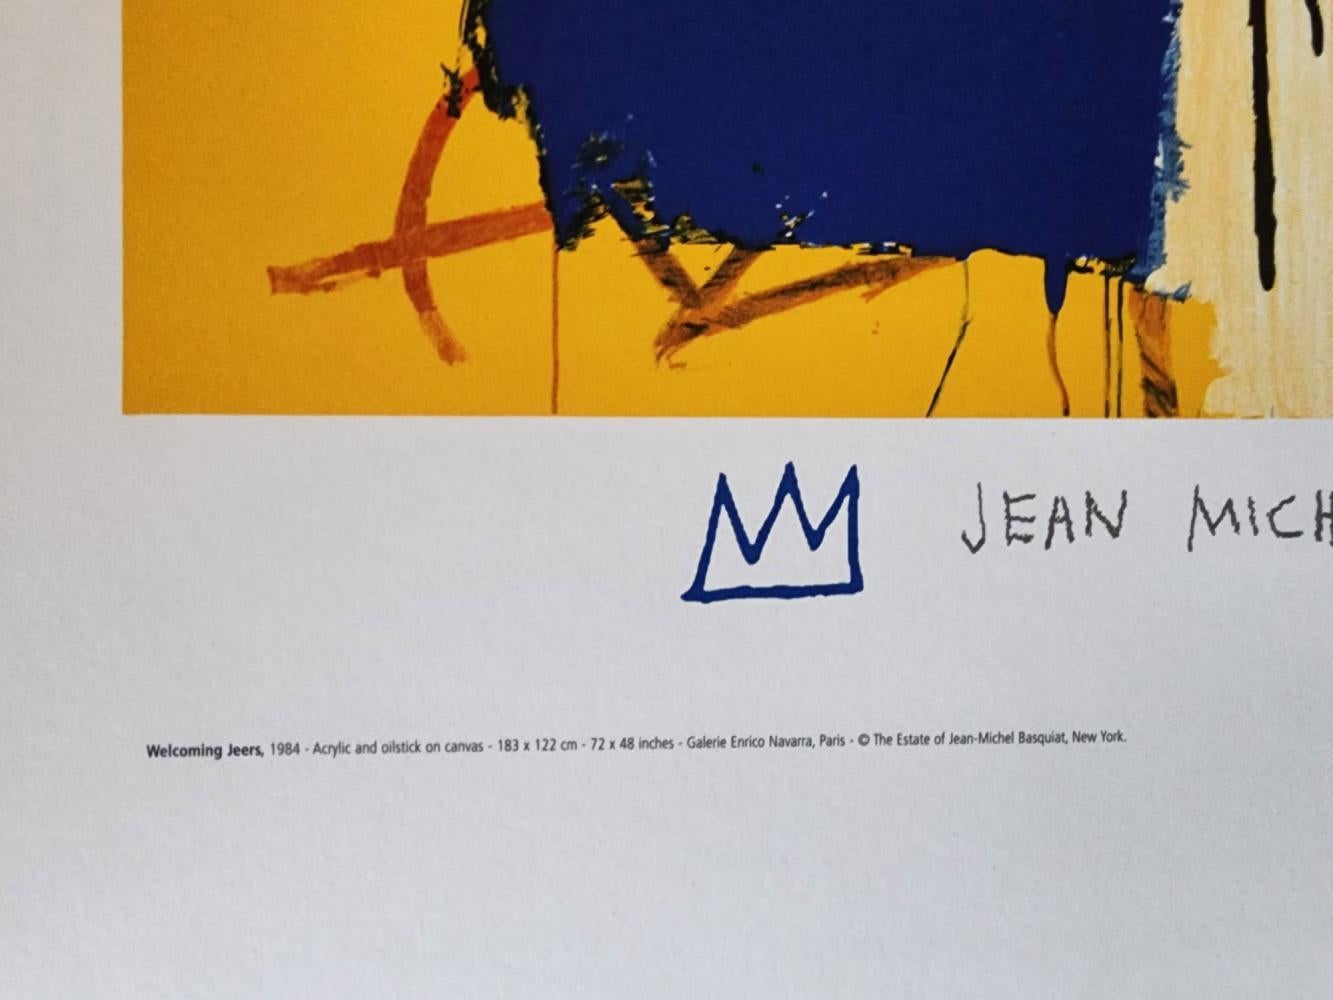 JEAN MICHEL BASQUIAT, 'WELCOMING JEERS 1997' VERY RARE LIMITED EDITION ESTATE LI - Pop Art Print by after Jean-Michel Basquiat